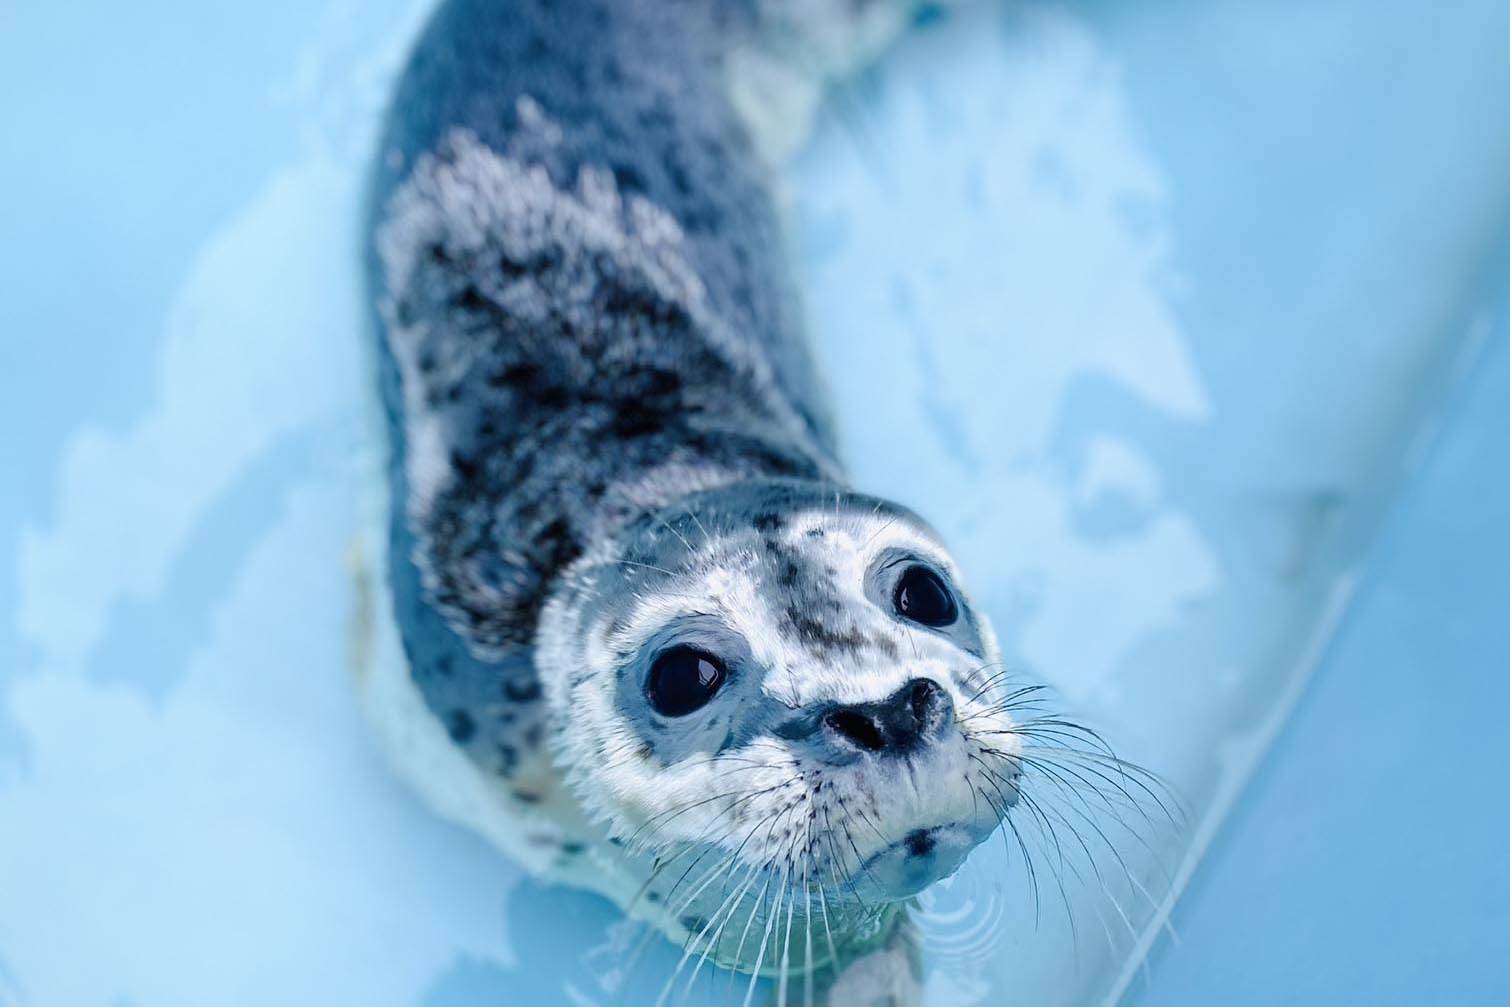 One of two baby seal pups rescued and transported to the Alaska SeaLife Center in Seward is seen in June 2021. (Photo provided by the Alaska SeaLife Center)